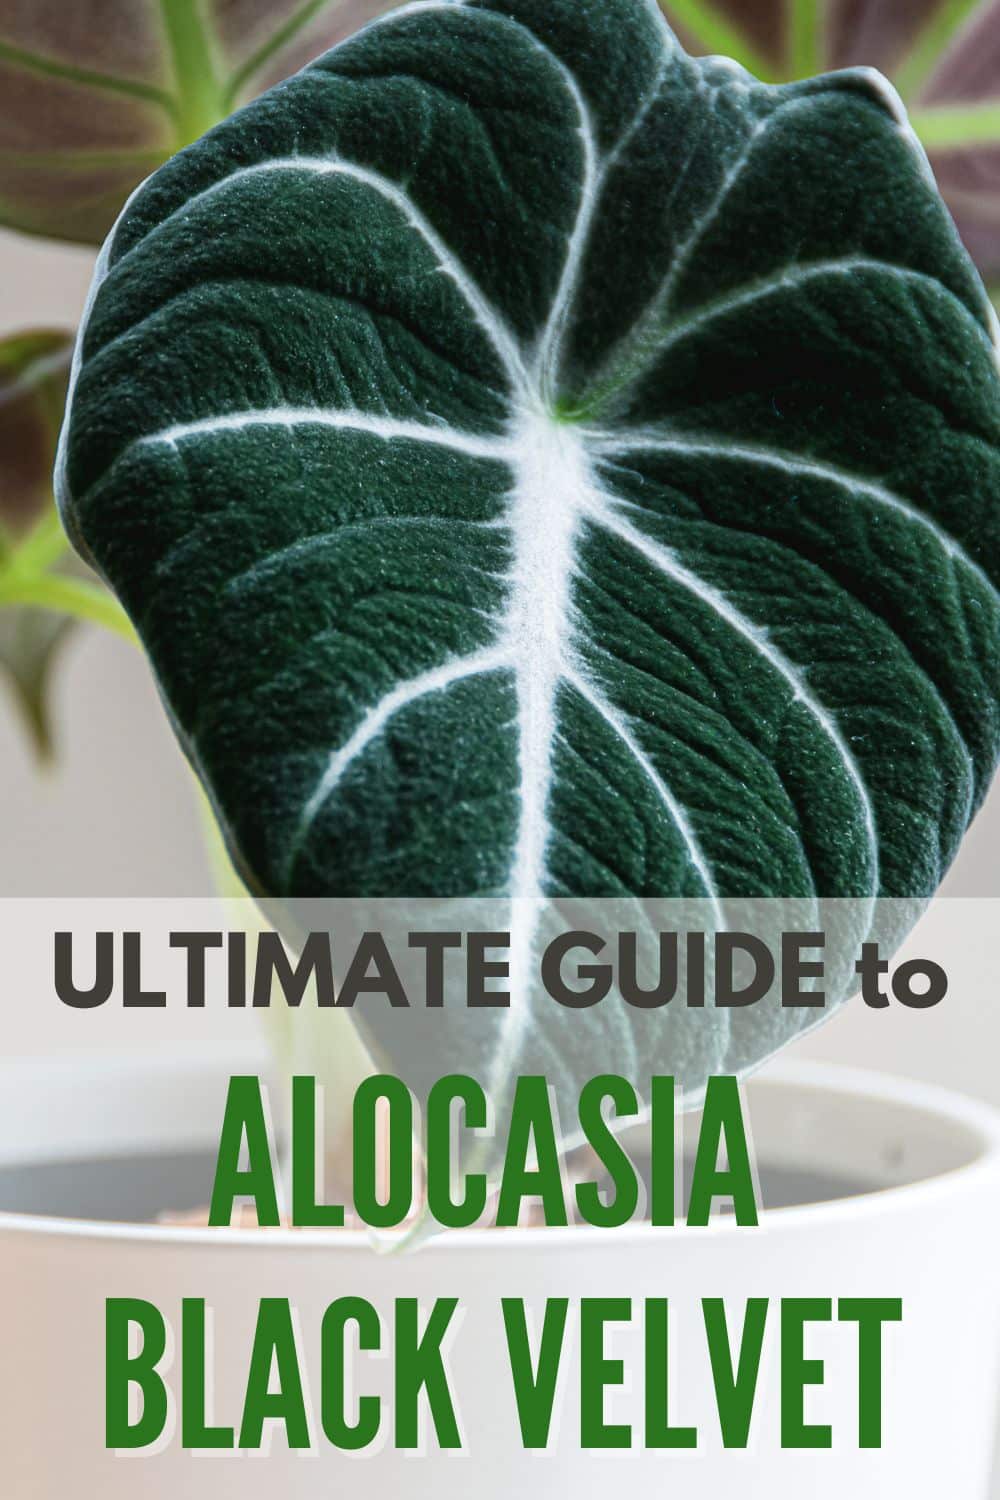 Learn all about how to grow and care for Alocasia Black Velvet, a variety of Alocasia reginula, a stunning plant with nearly black leaves. #alocasiablackvelvet #alocasiareginula #indoorplant #plantcare #tropicalplant via @wondermomwannab